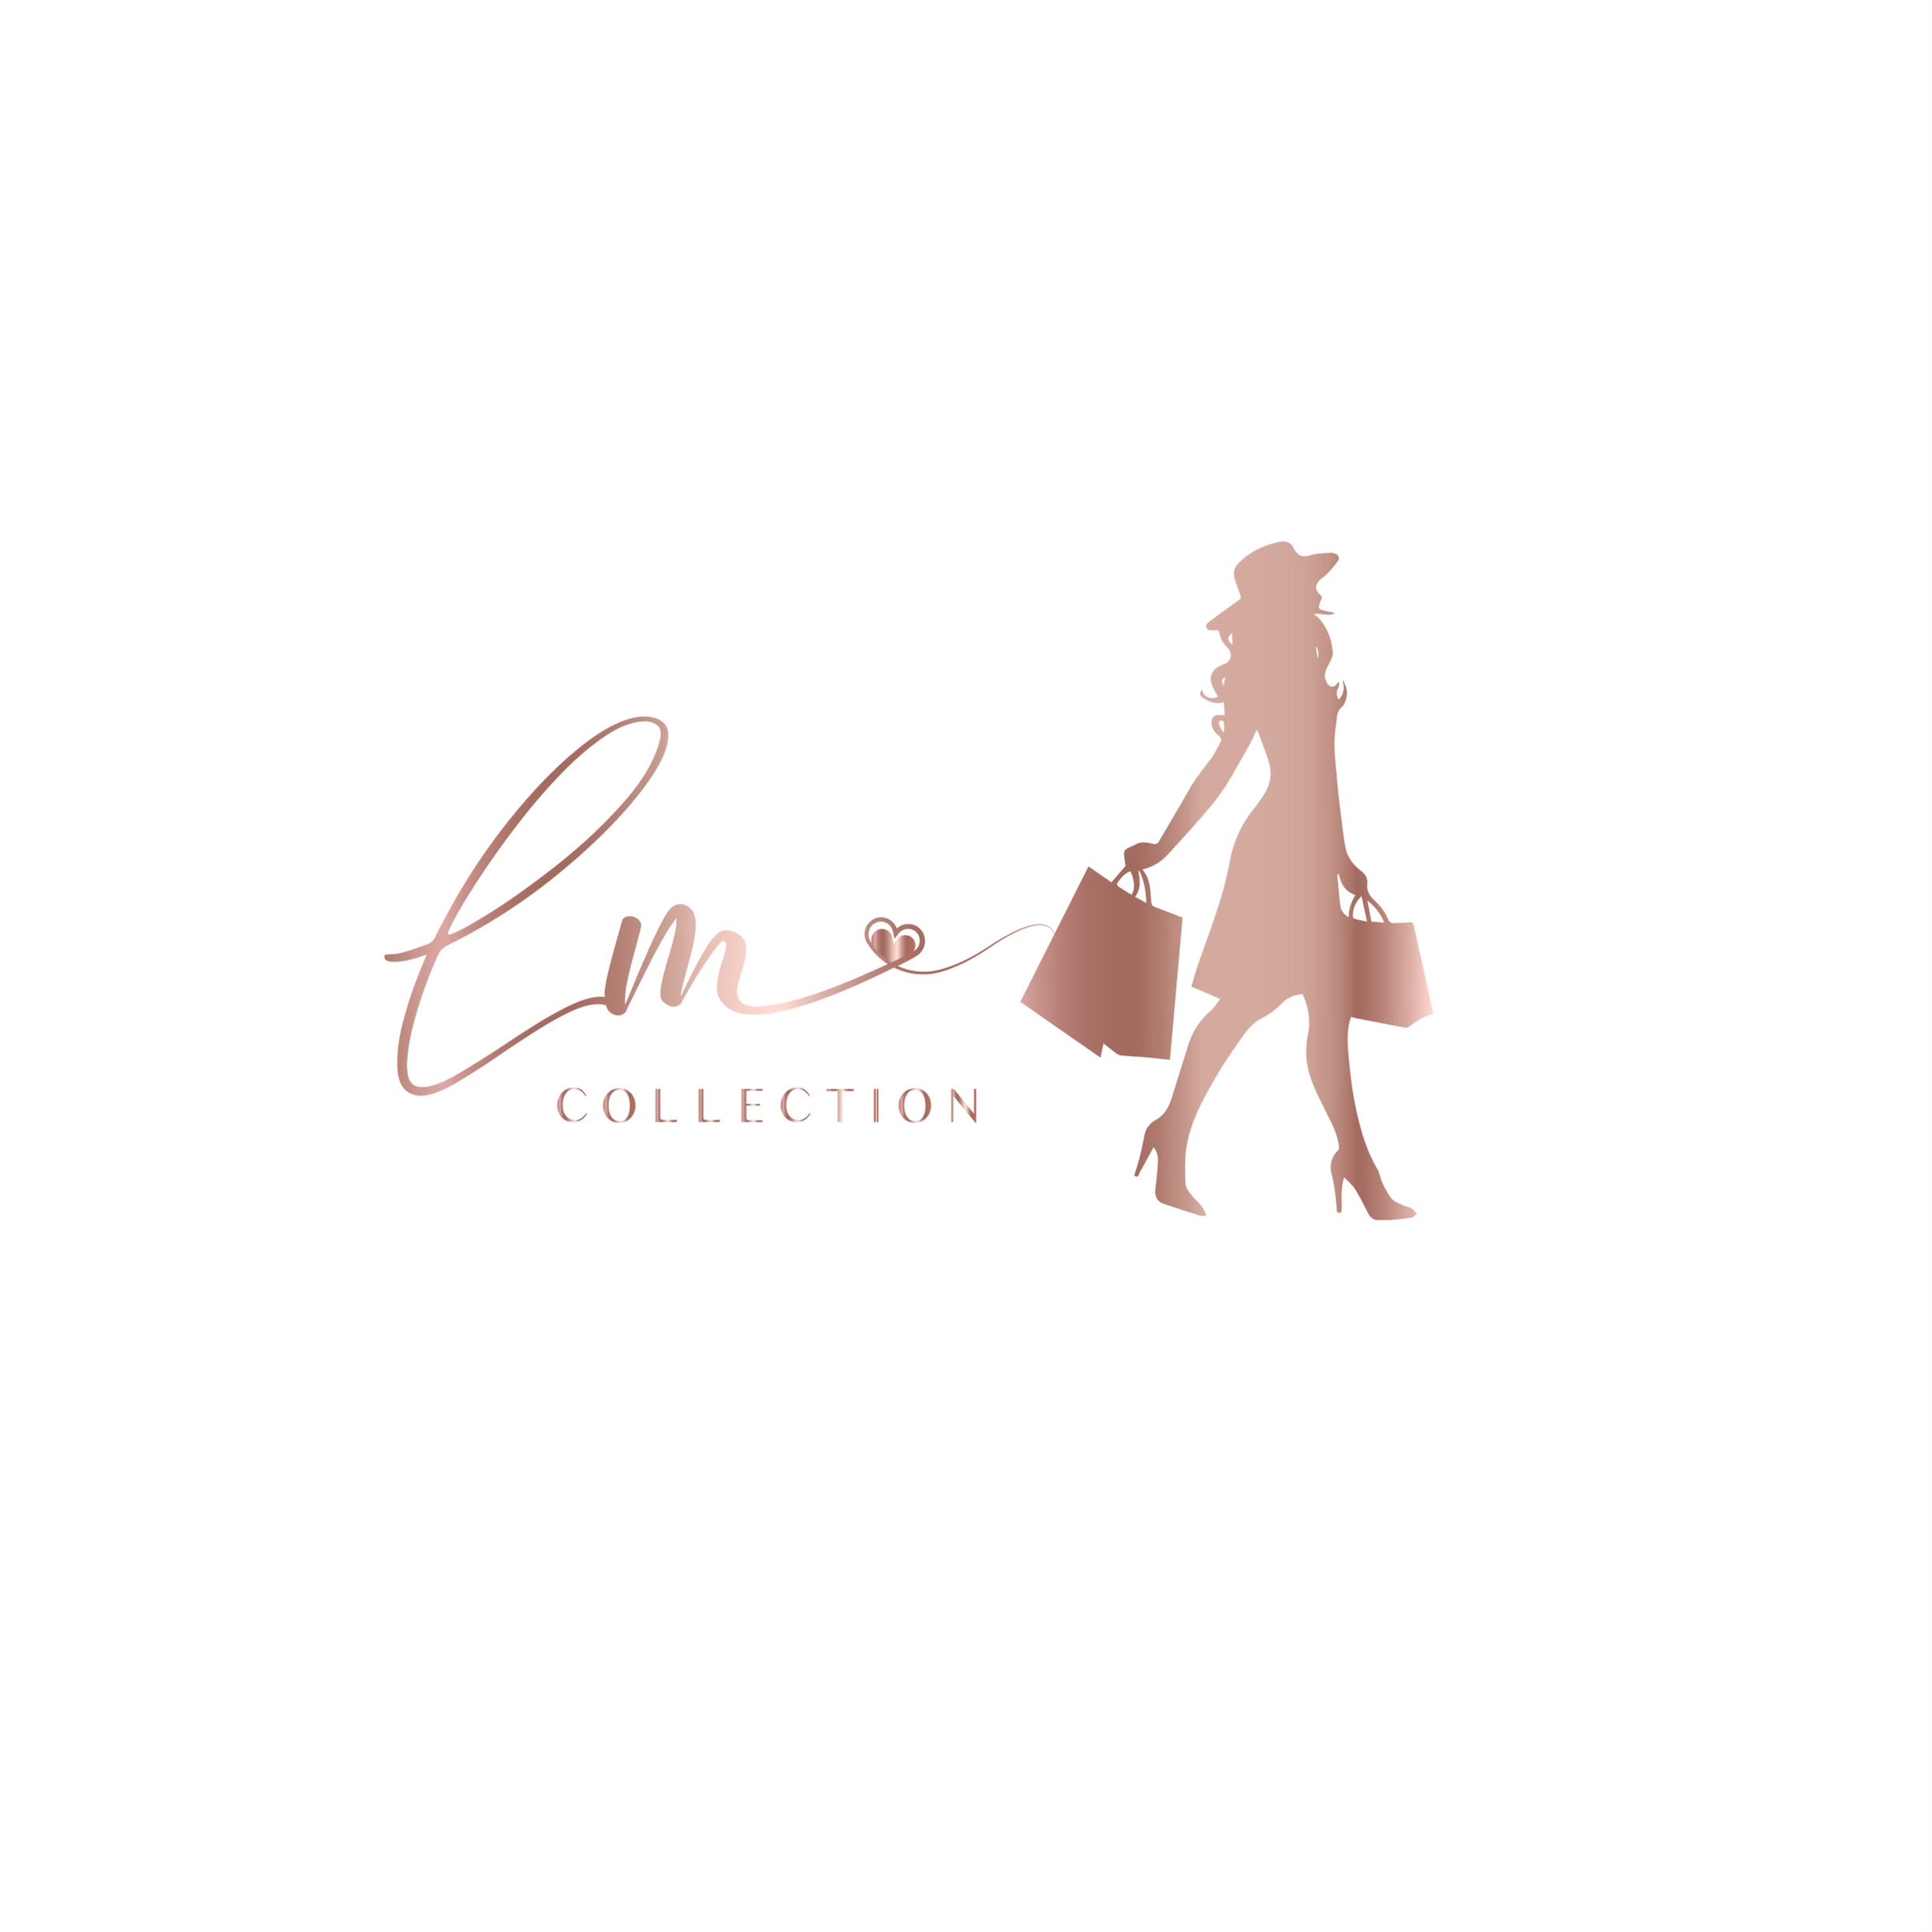 L.Mcollection